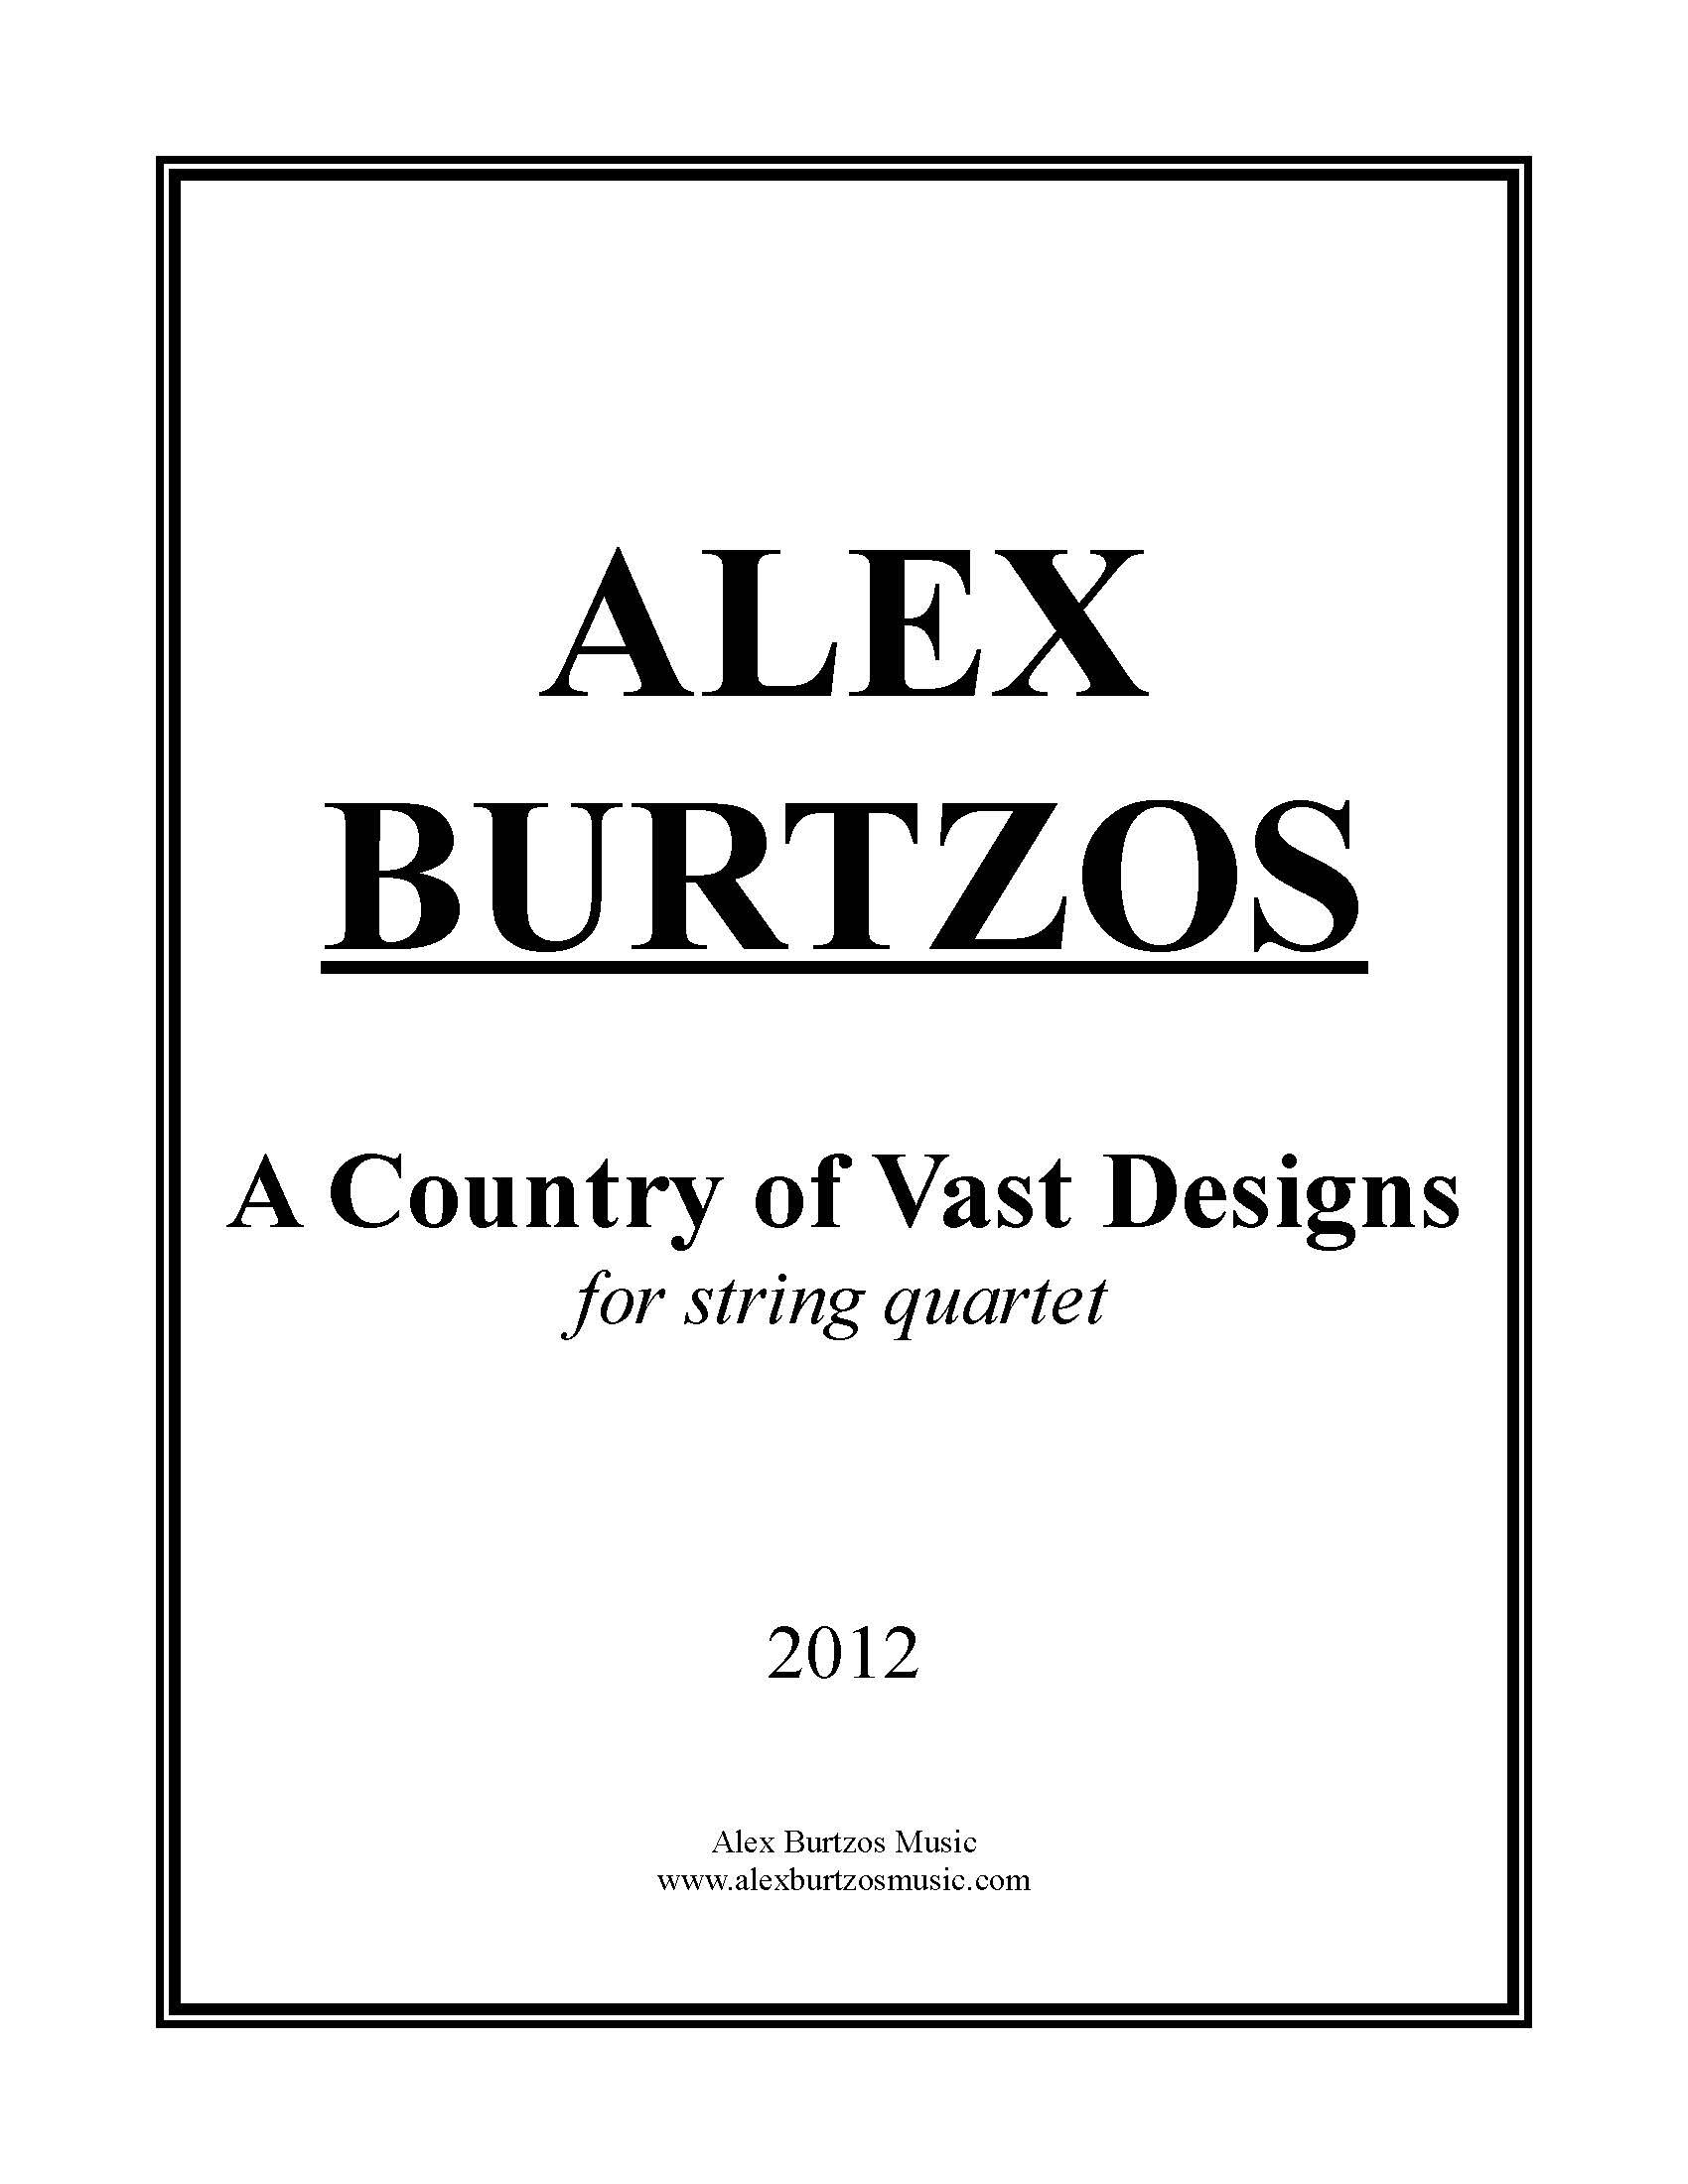 A Country of Vast Designs - Complete Score_Page_01.jpg